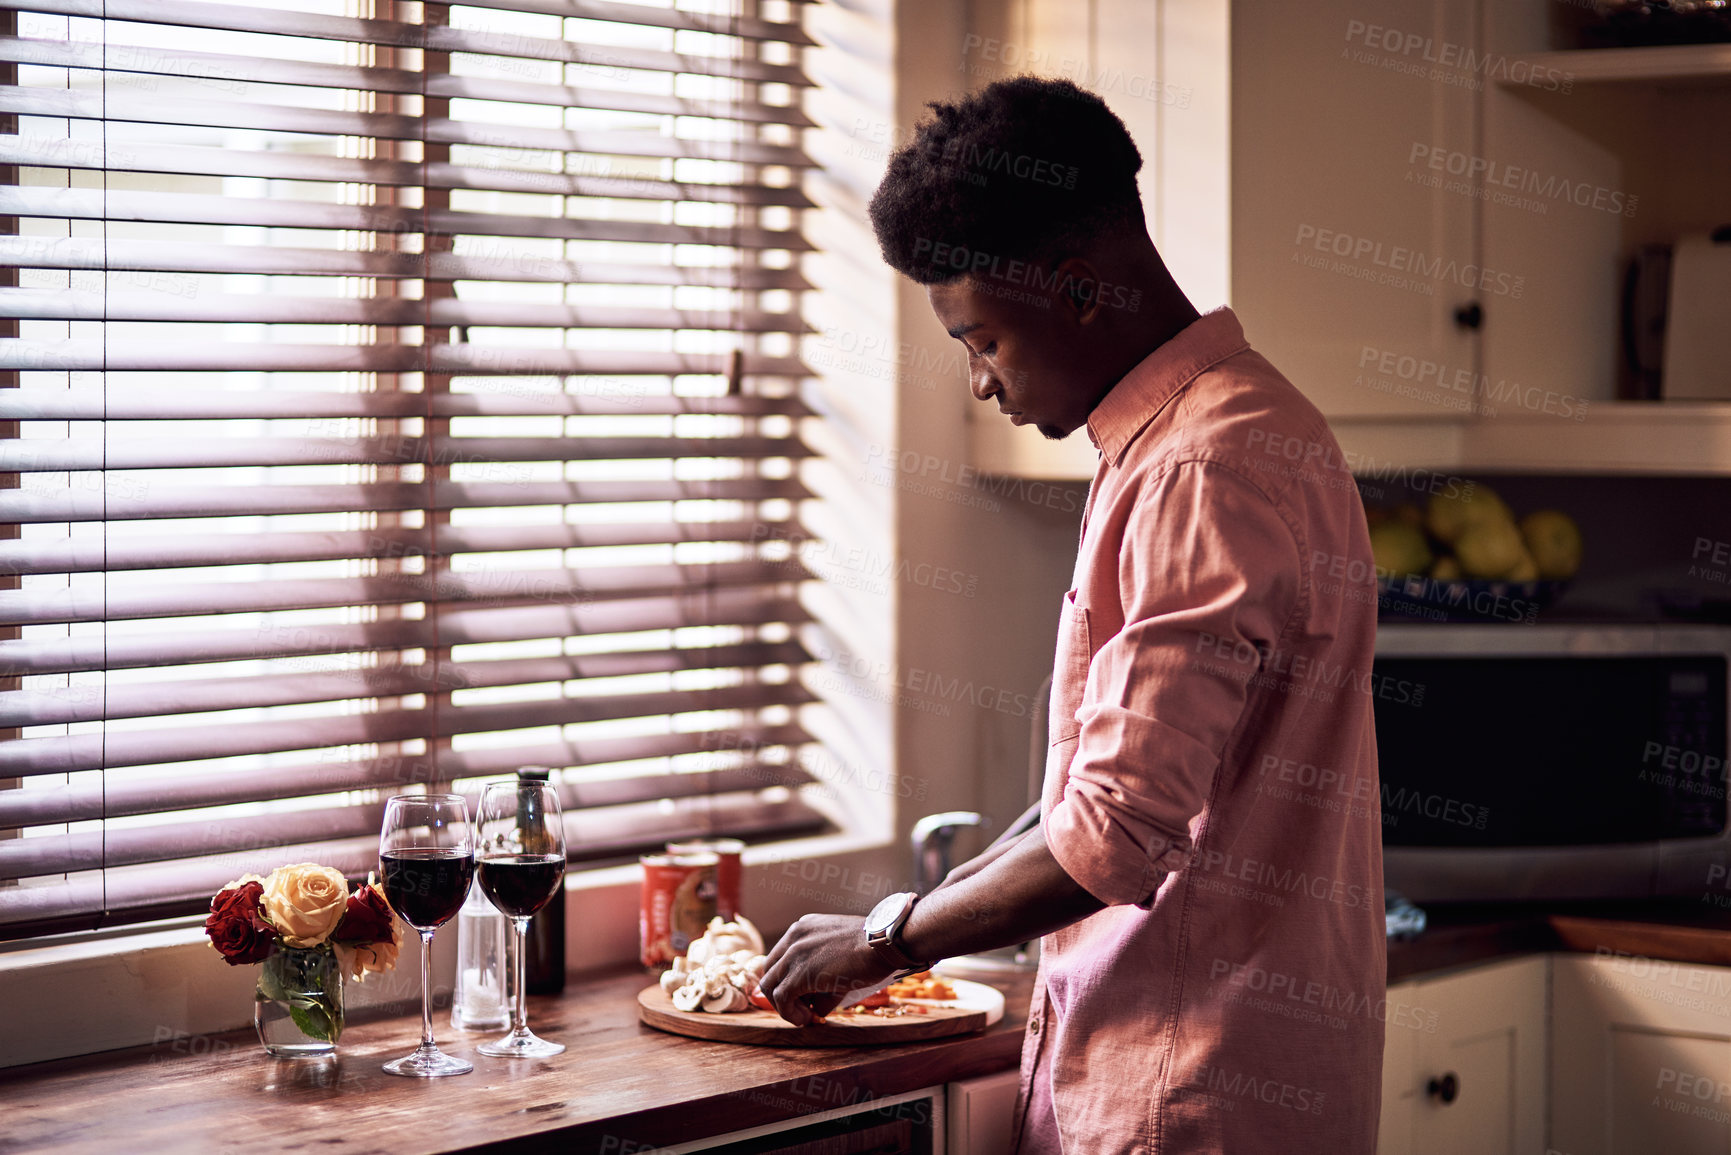 Buy stock photo Cropped shot of handsome romantic young man preparing a meal on Valentine's day at home